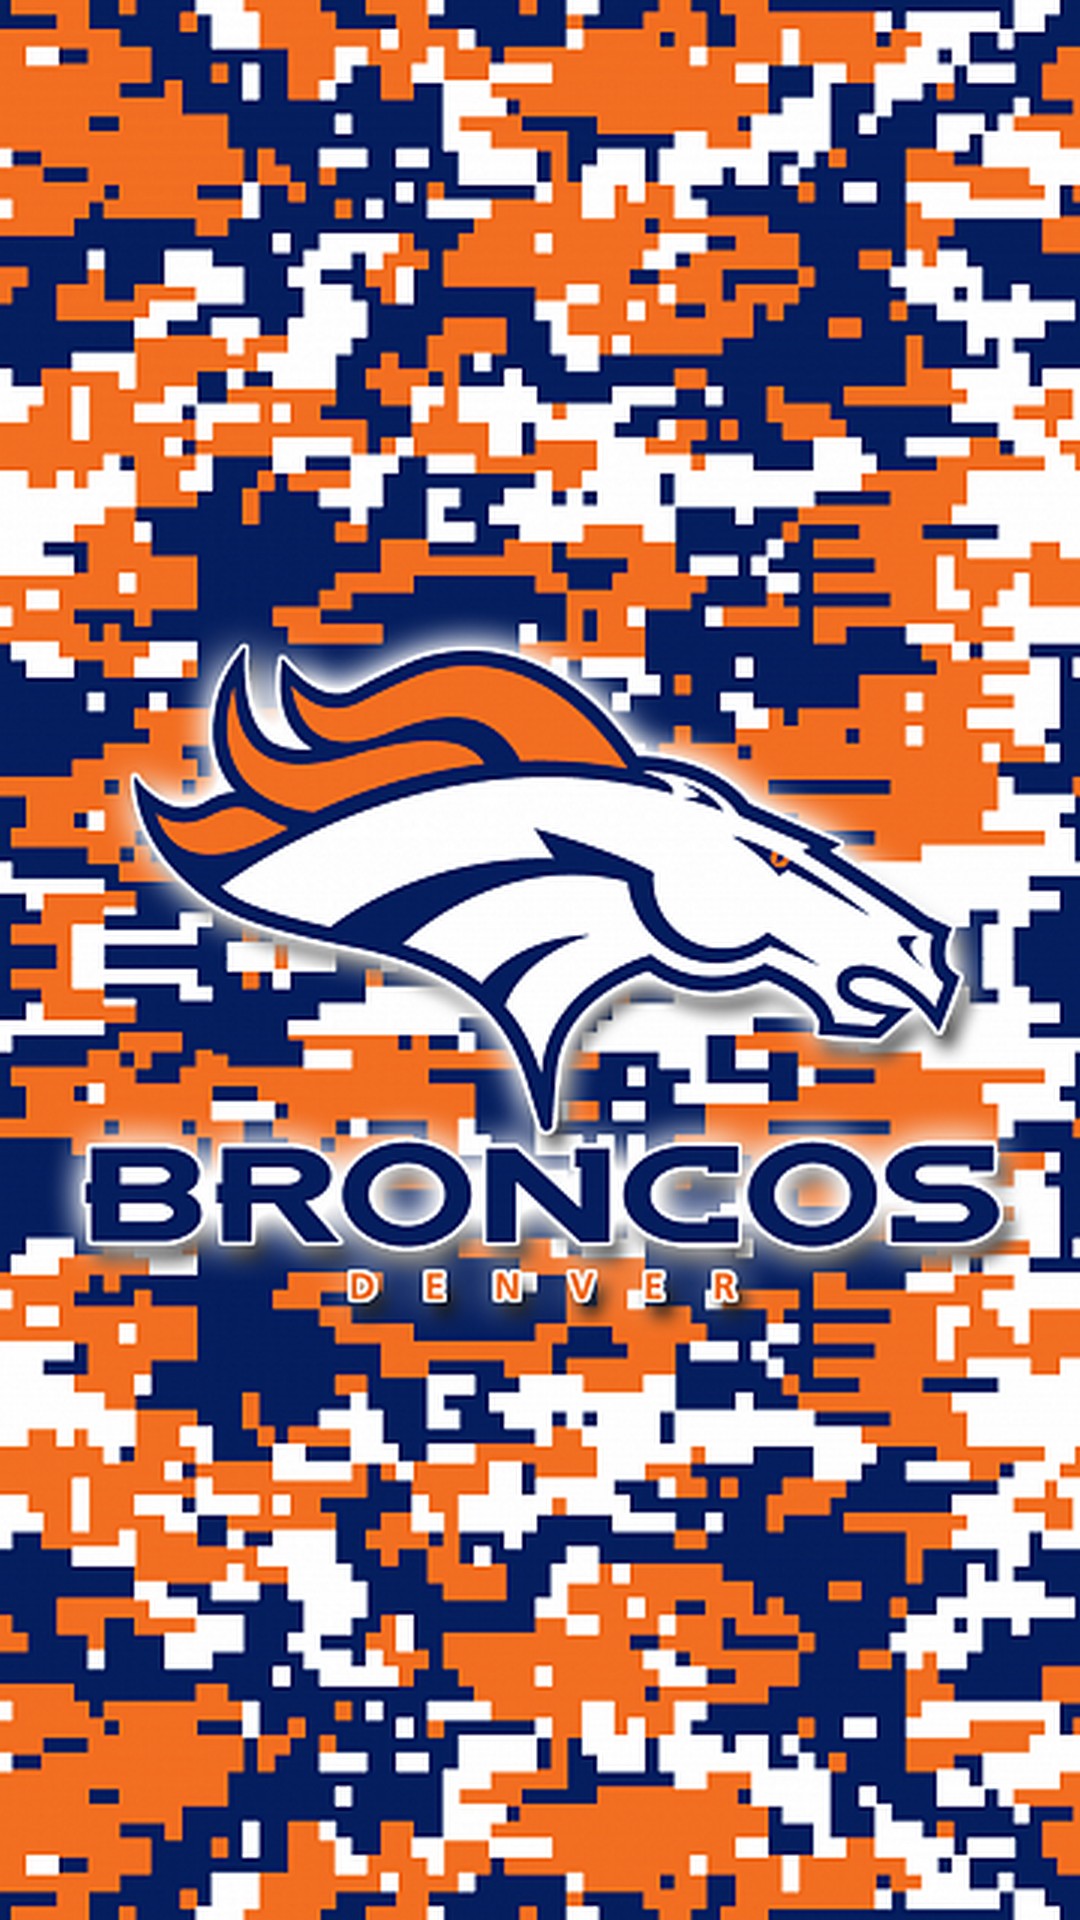 Denver Broncos iPhone Wallpaper Tumblr with high-resolution 1080x1920 pixel. Download and set as wallpaper for Apple iPhone X, XS Max, XR, 8, 7, 6, SE, iPad, Android